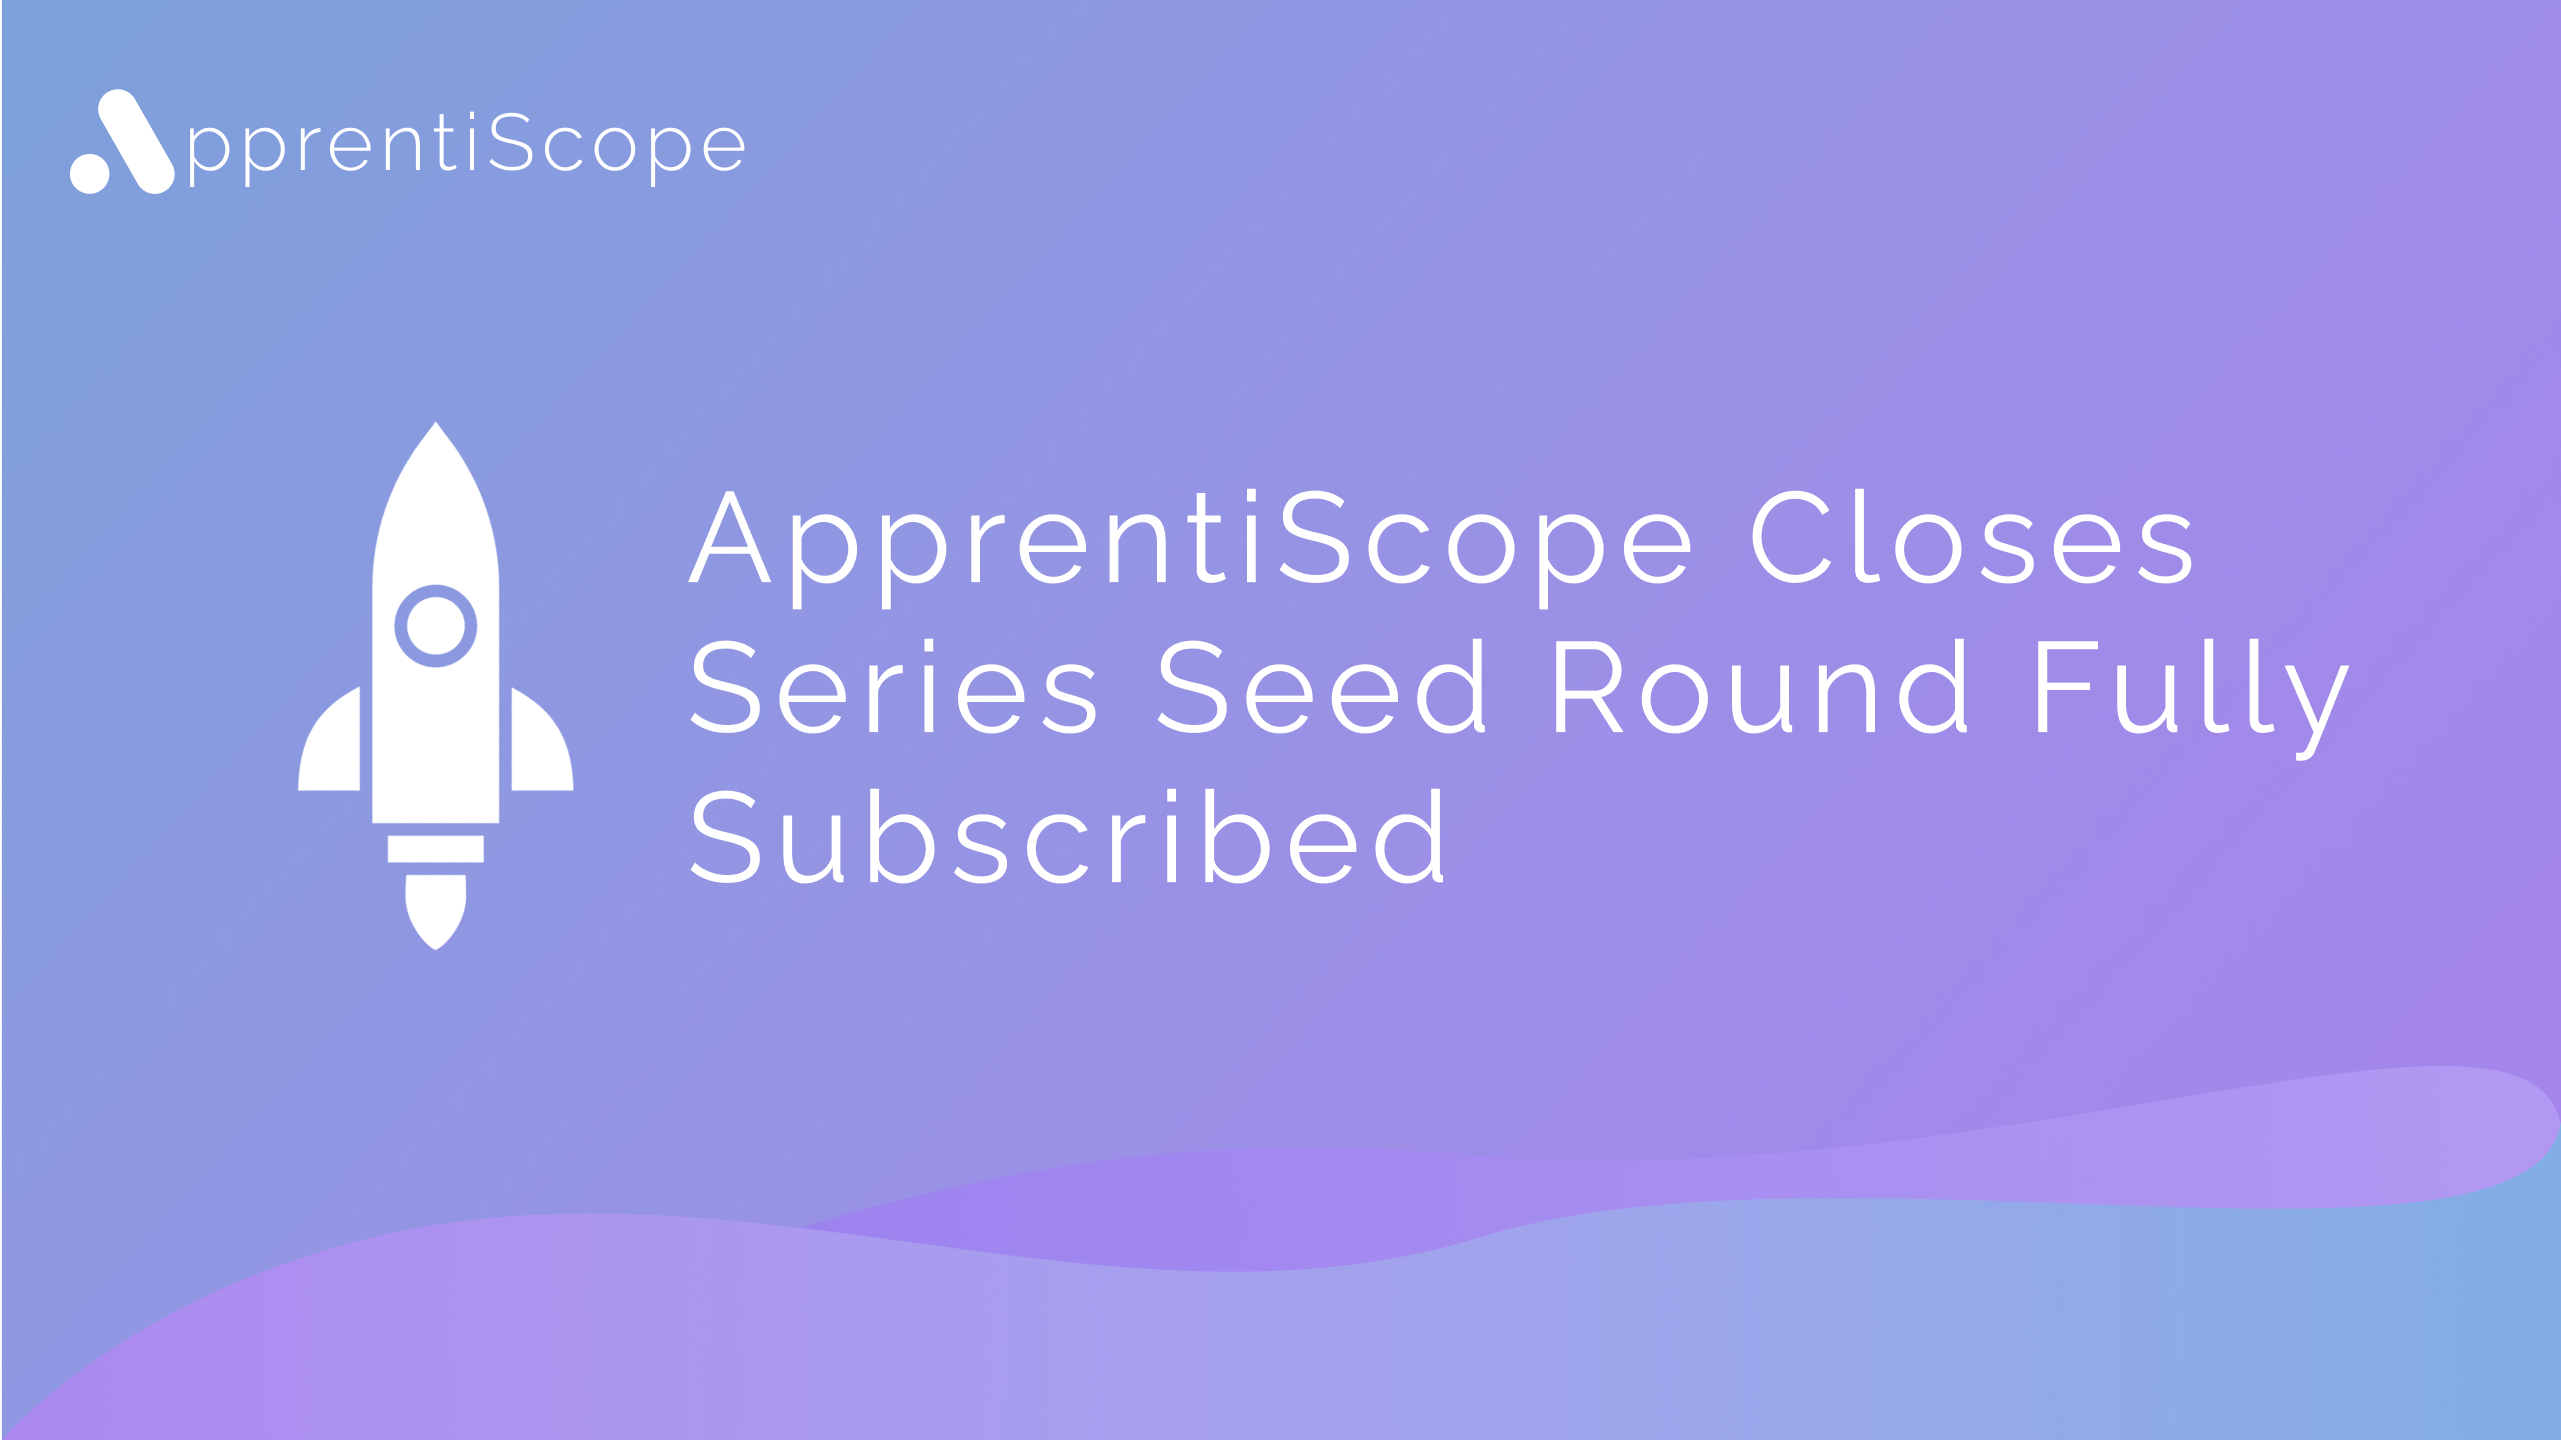 ApprentiScope Closes Series Seed Round Fully Subscribed